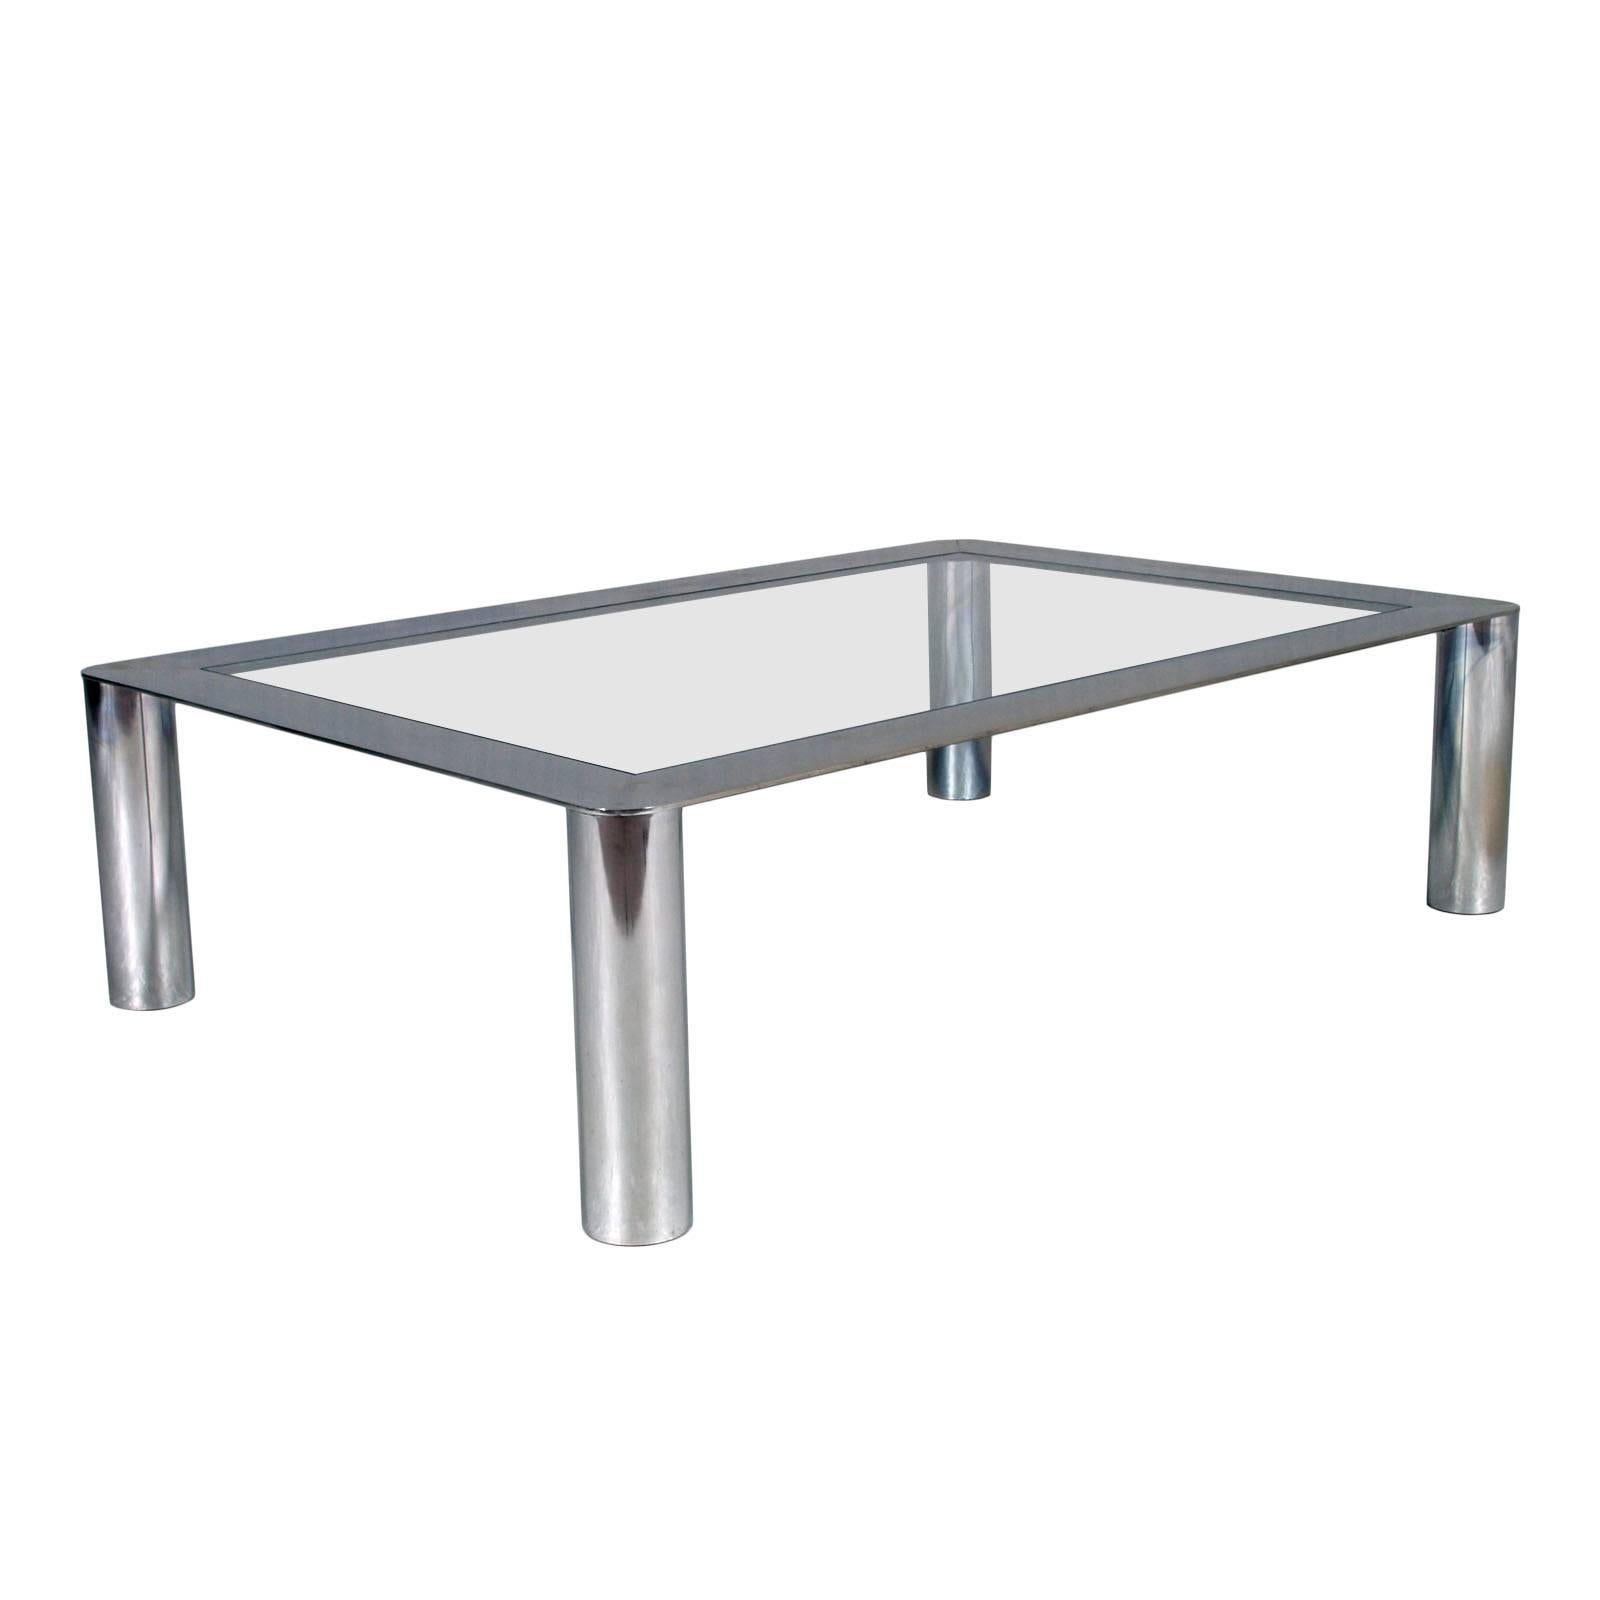 Coffee table in chromed steel with fumè crystal top, style Gianfranco Frattini per Cassina, circa 1970s

Measures cm: H 36 x W 134 x D 90.

 